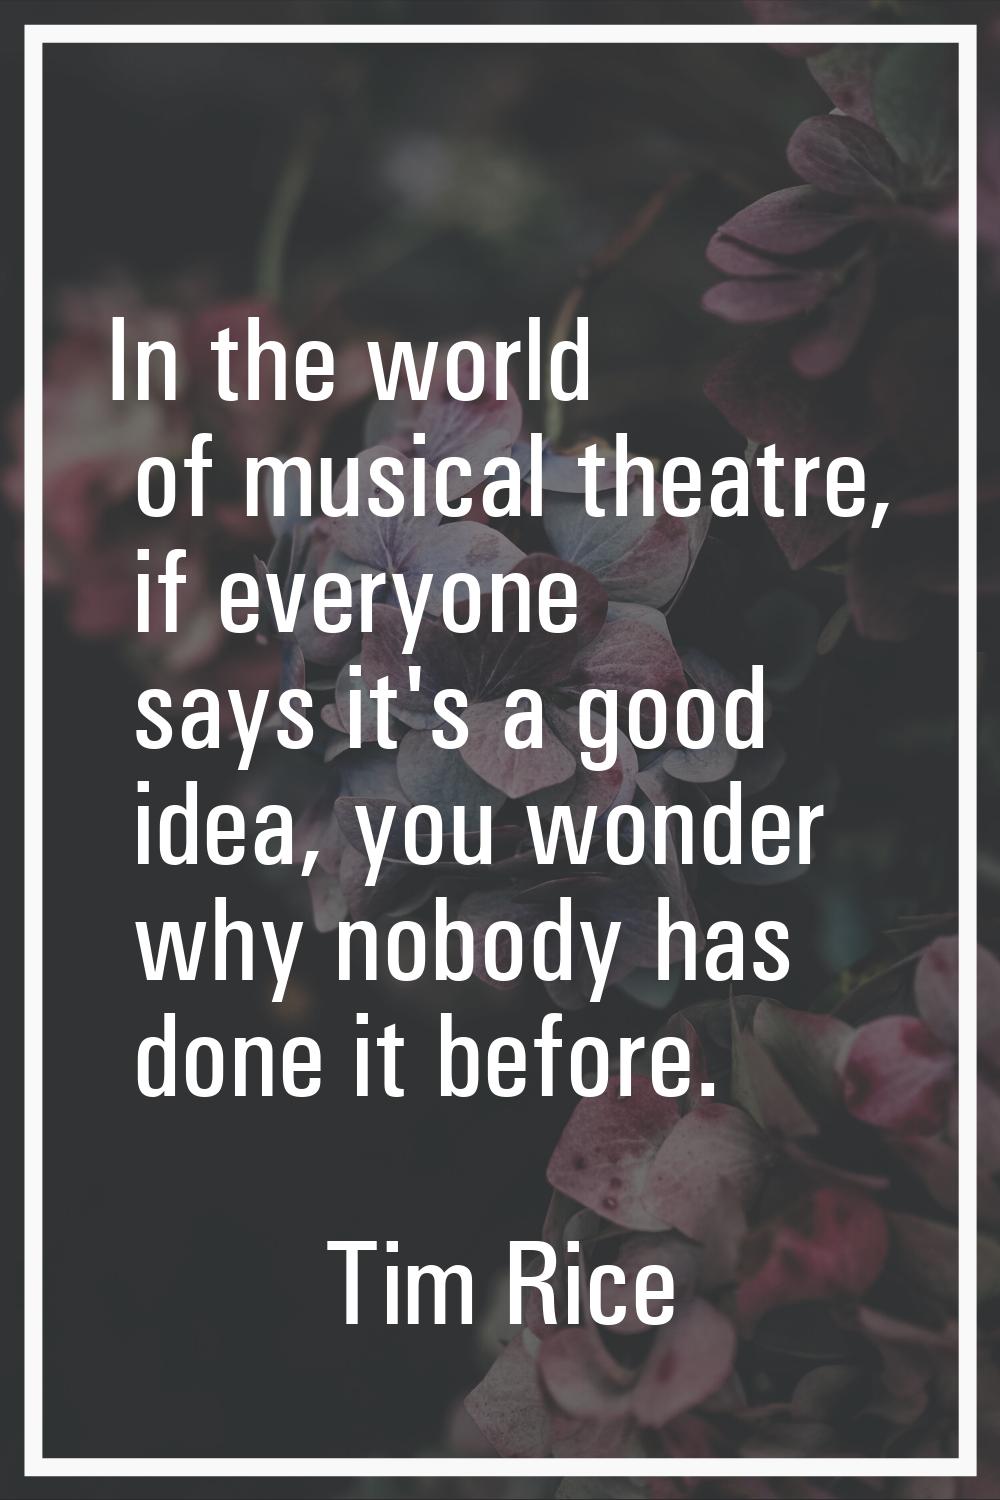 In the world of musical theatre, if everyone says it's a good idea, you wonder why nobody has done 